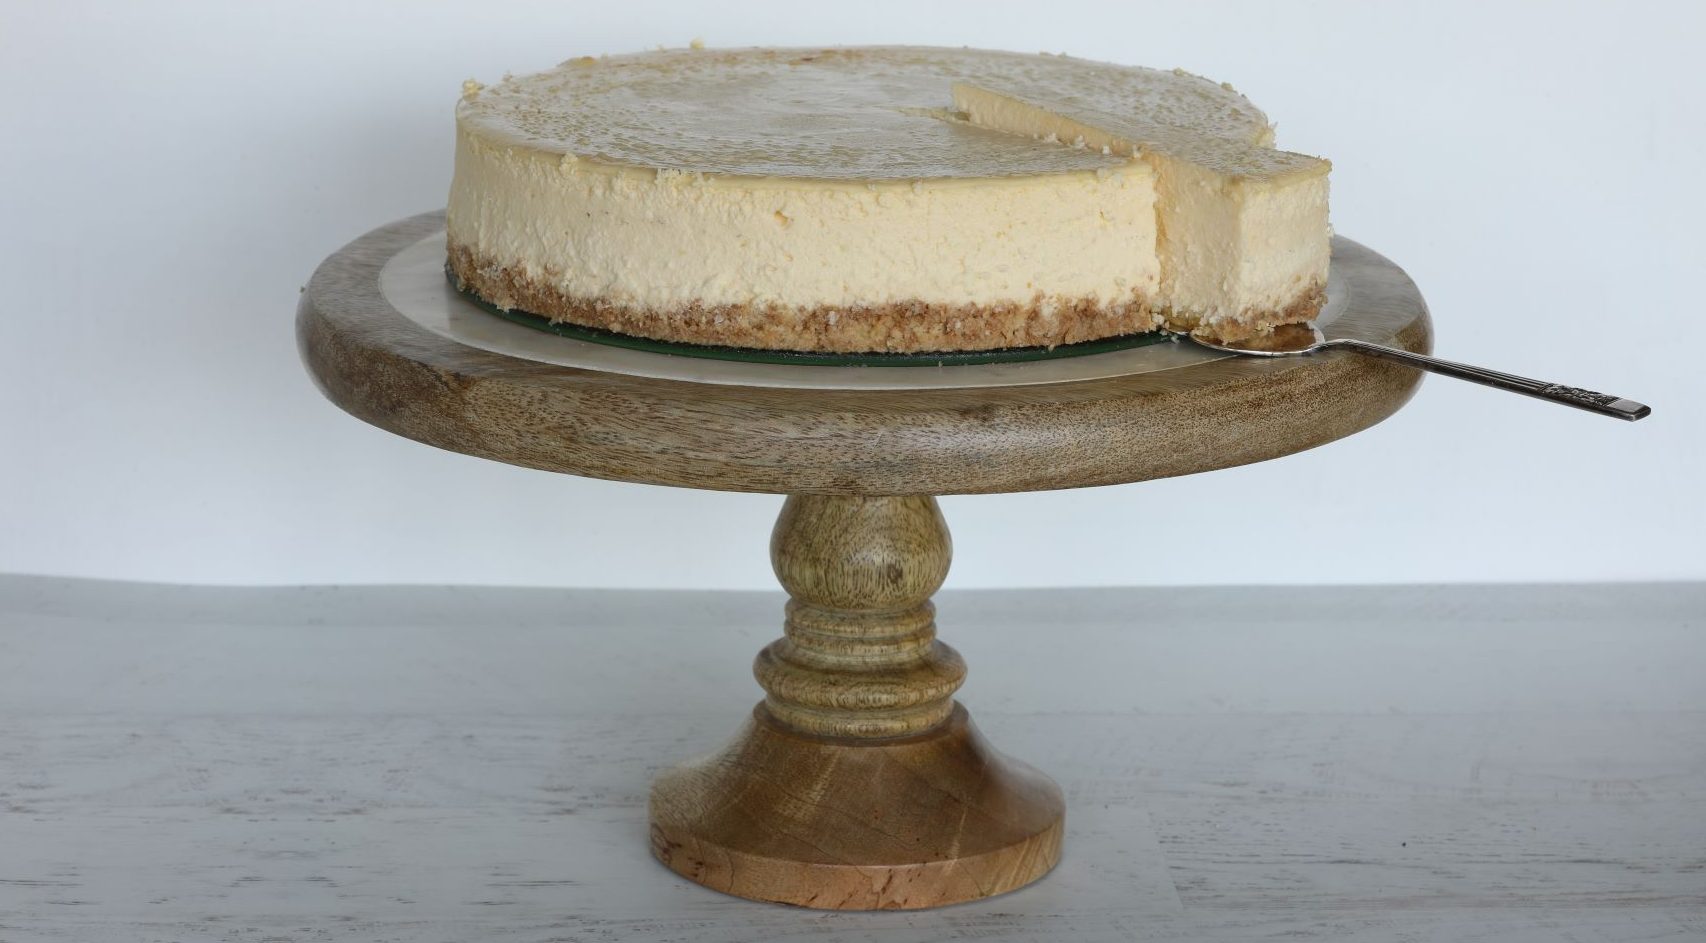 Low Carb Creamy Baked Cheesecake